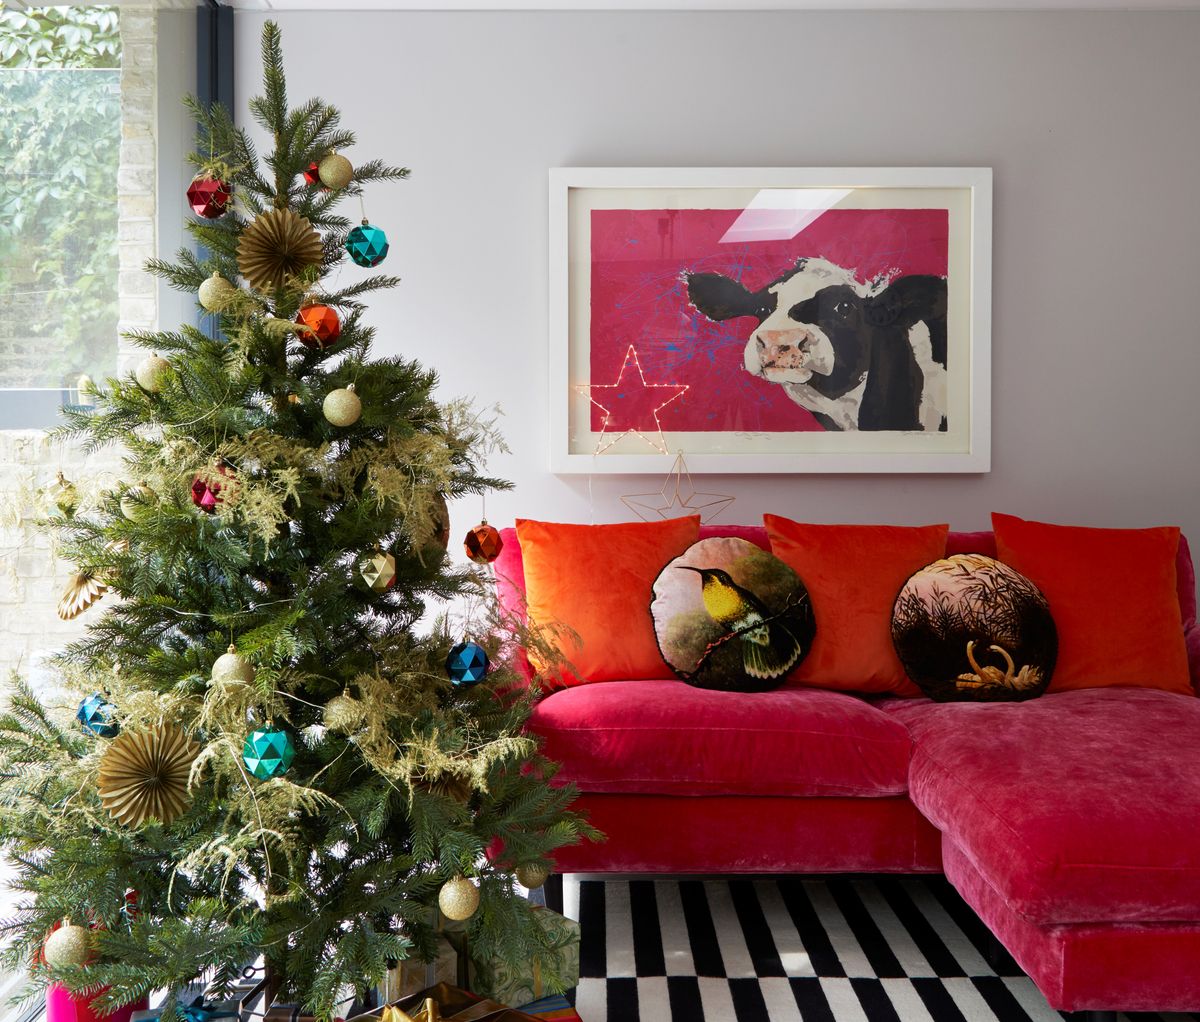 How do you fit a Christmas tree in a small living room?